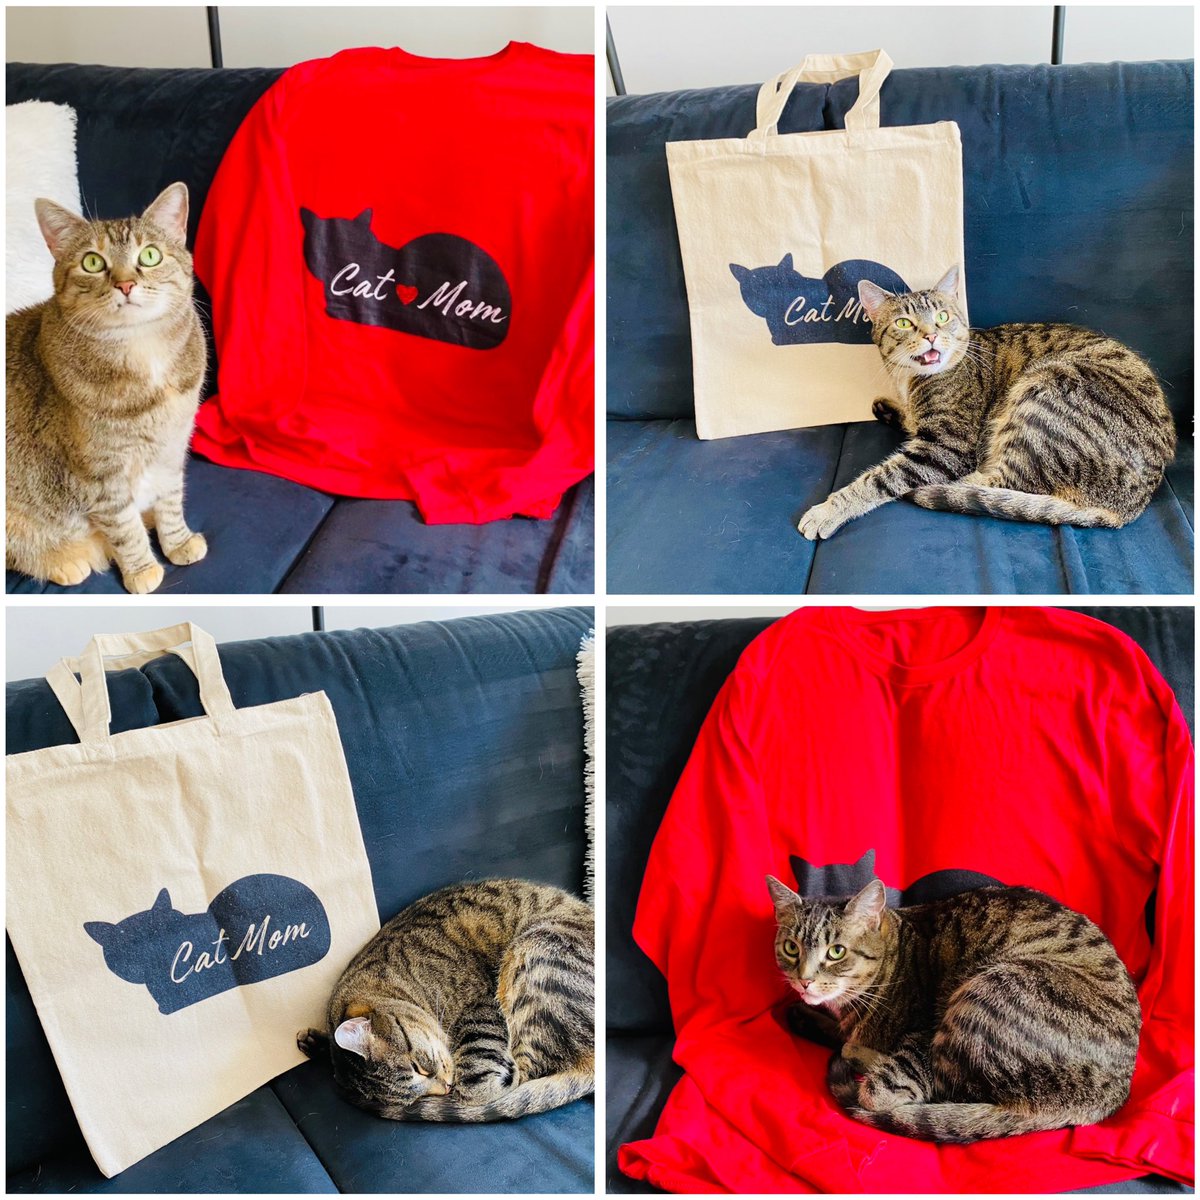 🎉 #CatLadyDay presents for mum arrived! Mum can sport this purrrfect ‘Cat Mom’ tee while she uses the bag to carry our cans of food to the lake! Remy liked the design & mirrored it! 😹 — Hazel From @cheetoandbalaze ▶️ etsy.com/shop/CatsAreAw…  #CatMom #FelineFashion #catsofX